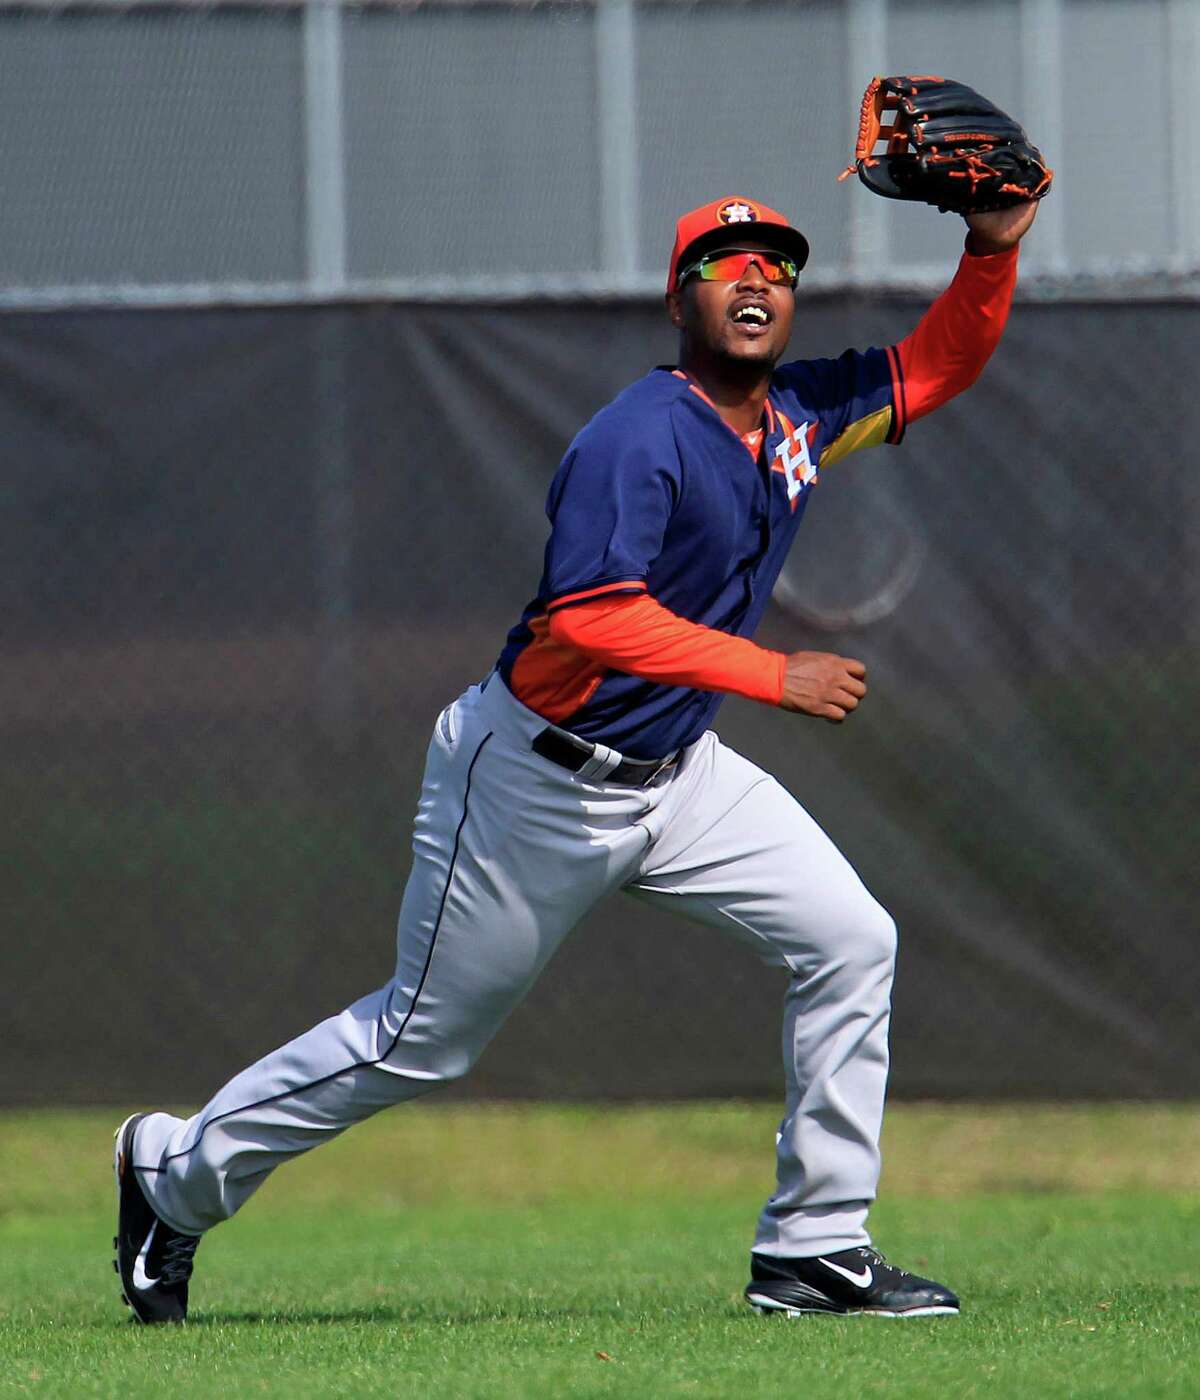 Houston Astros outfielder L.J. Hoes (28) during a spring training